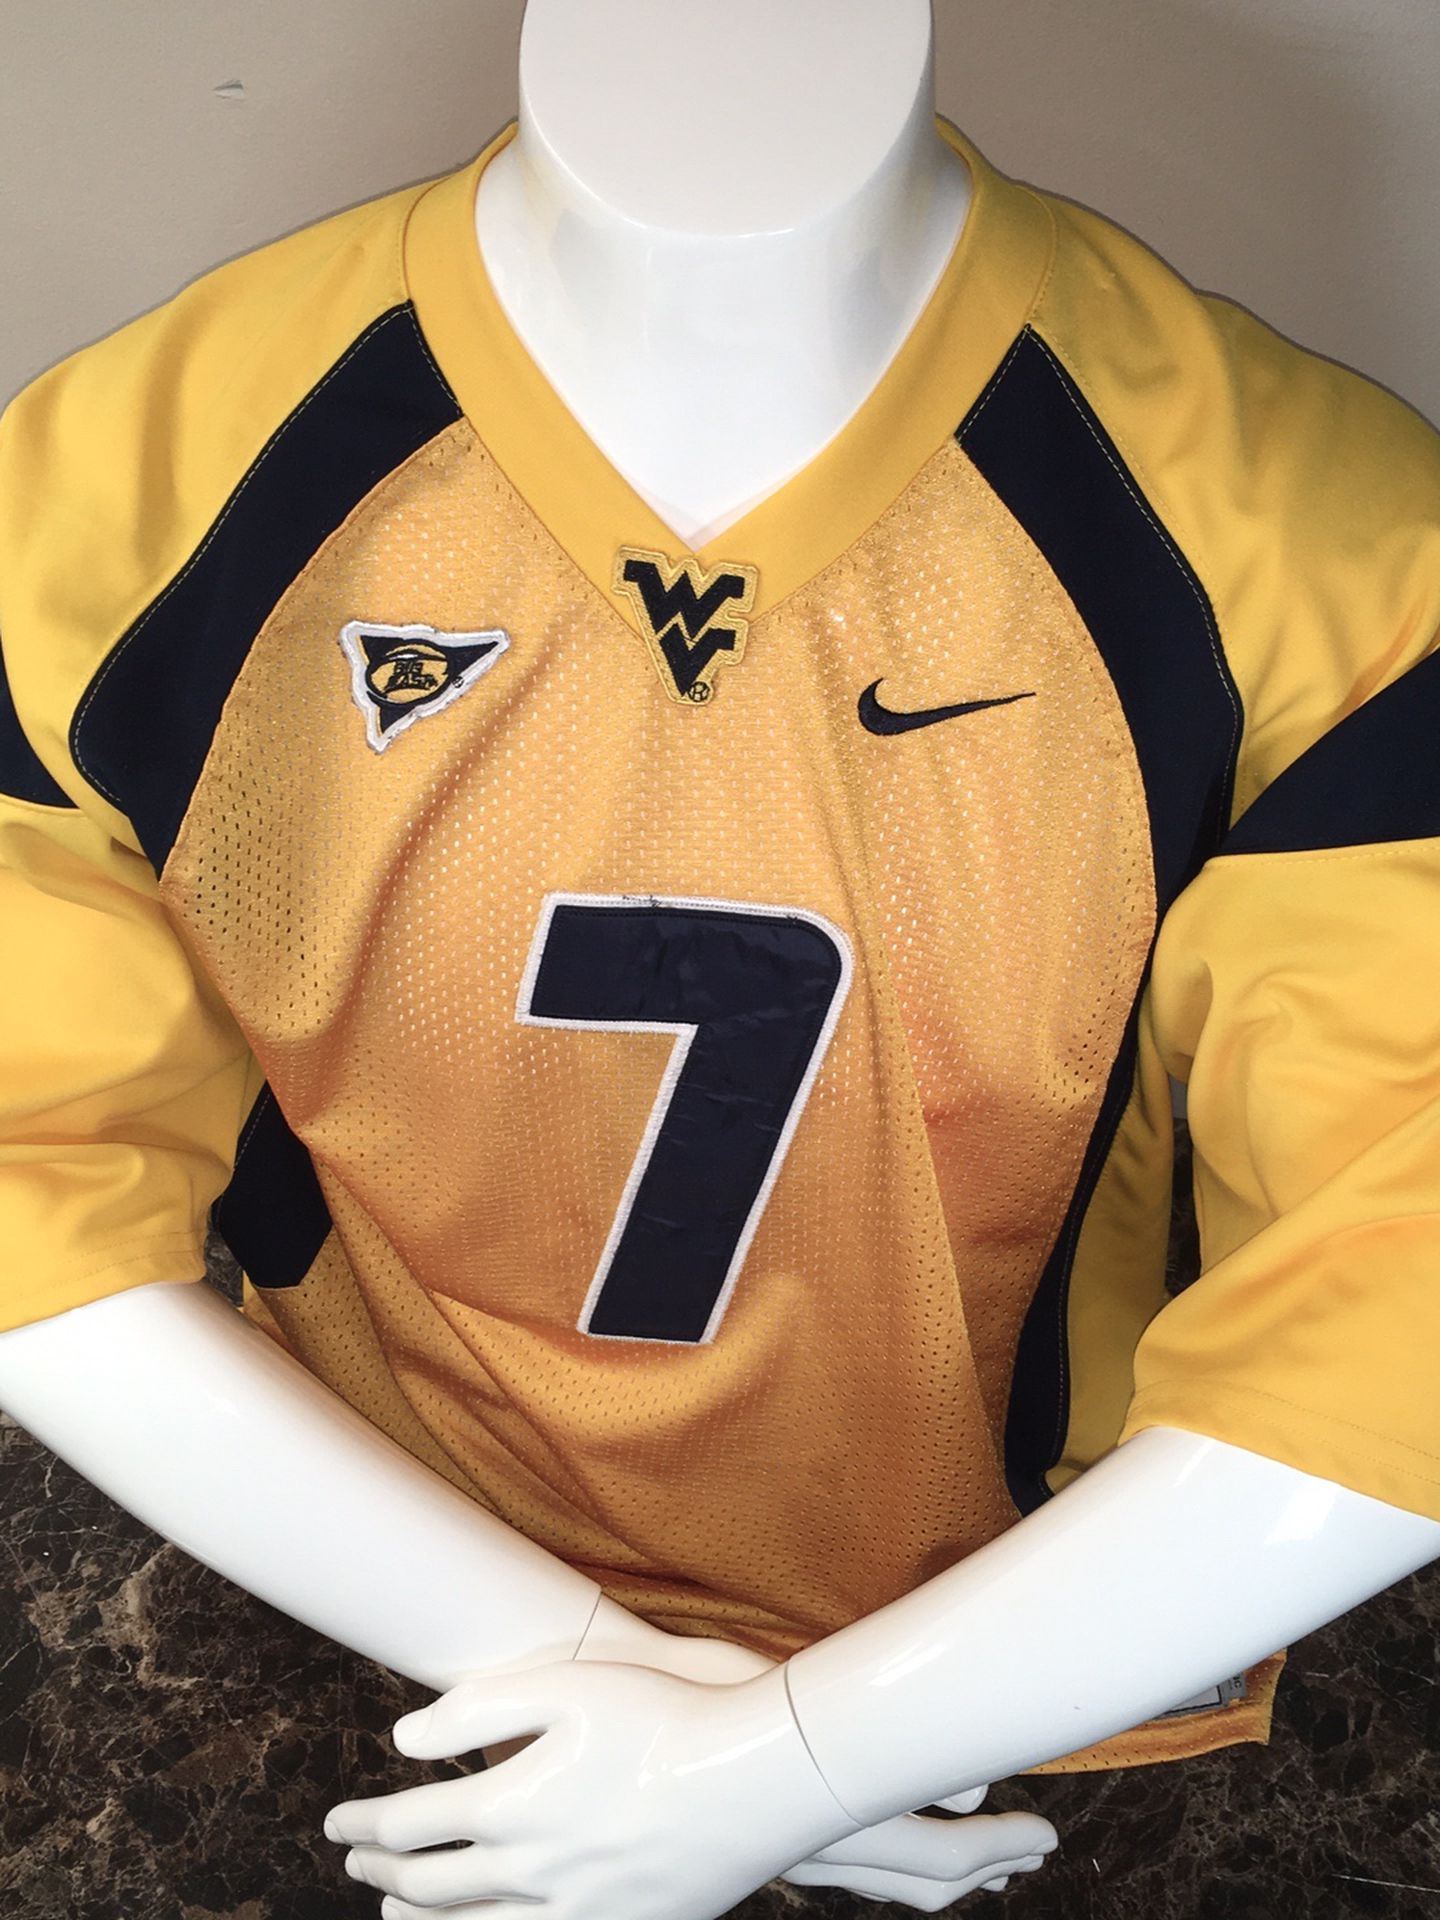 Men's Sz 52 Nike WVU Mountaineers Football Jersey Yellow Gold # 7 WV Please see photos for details Sewn/Stitched West Virginia University